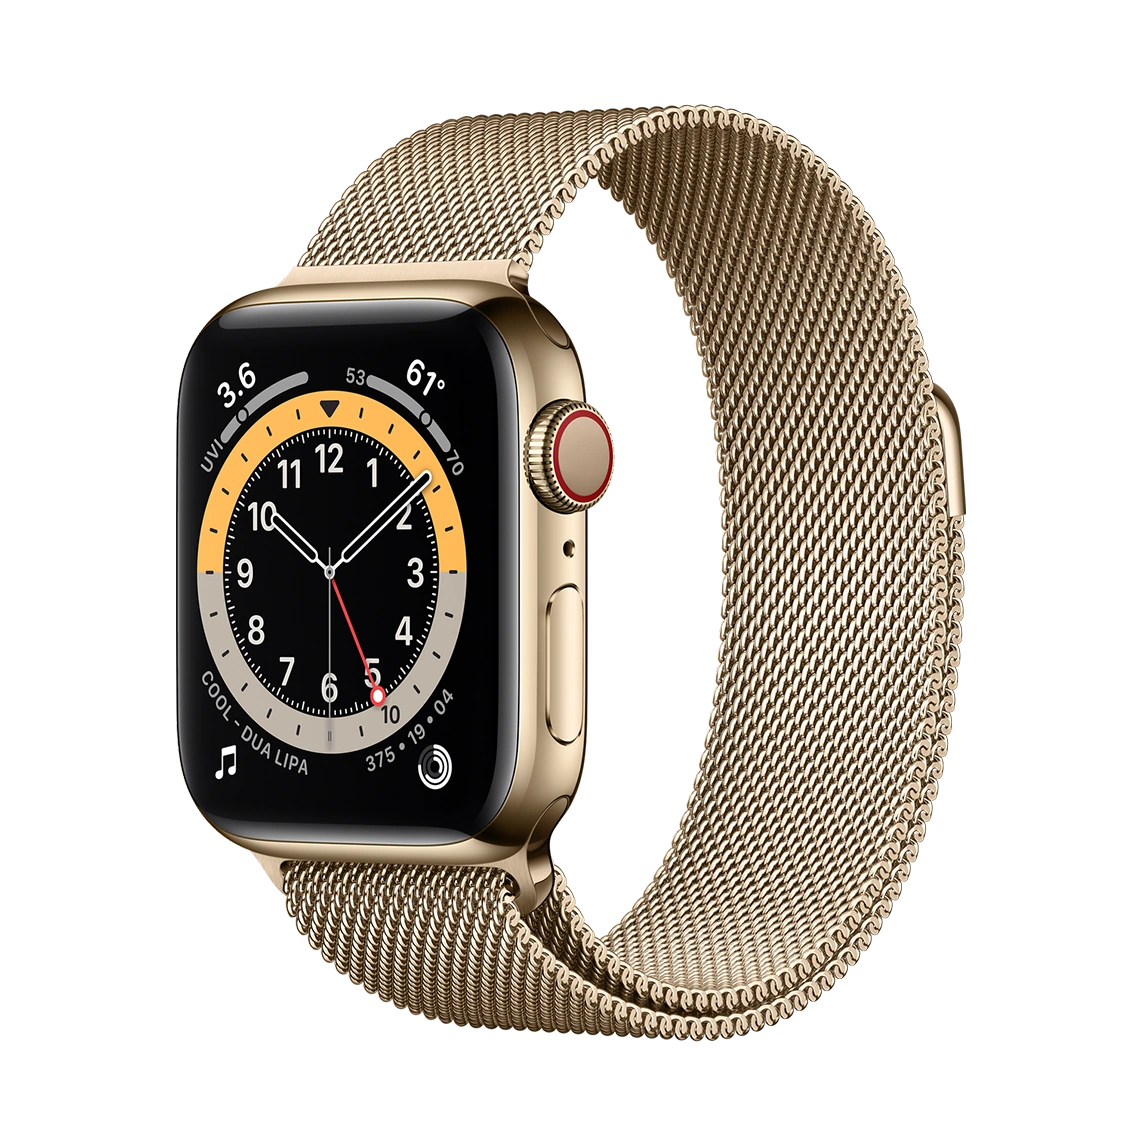 apple-watch-series-6-gold-stainless-steel-case-with-milanese-loop